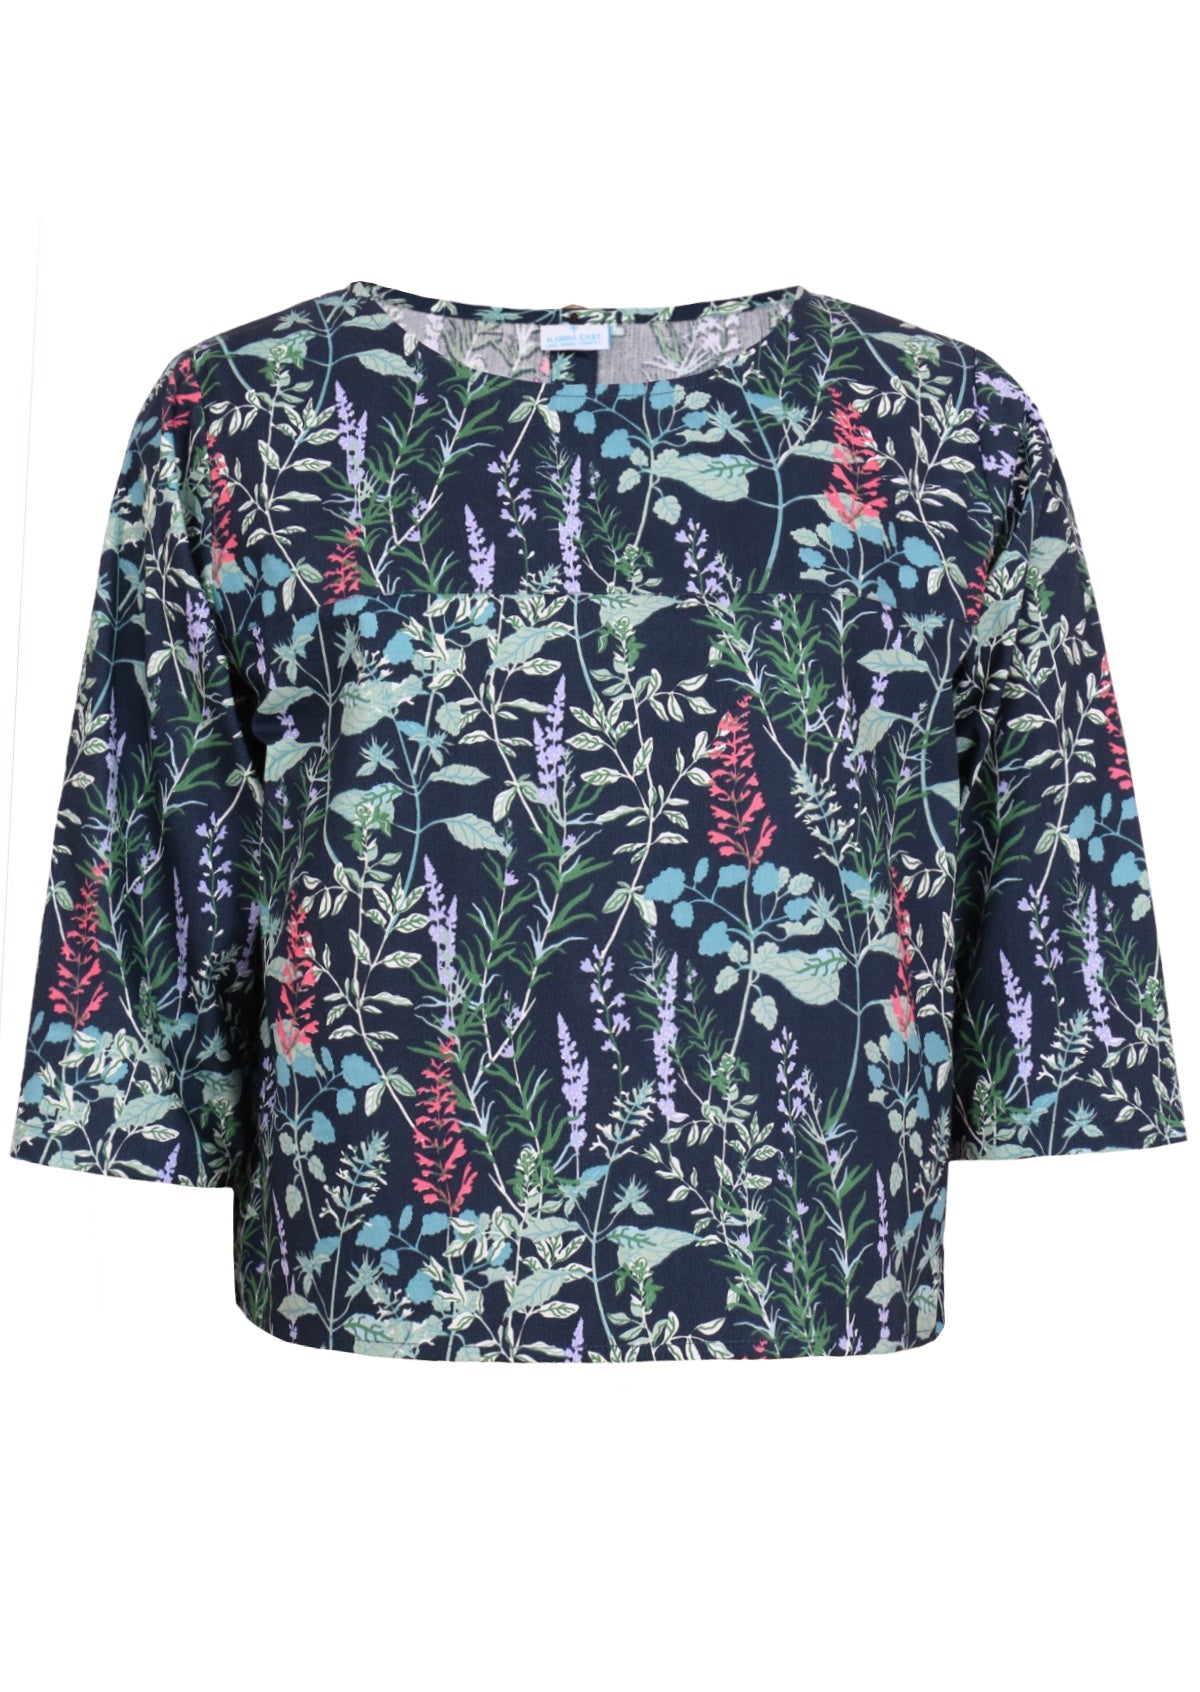 High round neckline and 3/4 sleeve cotton floral top